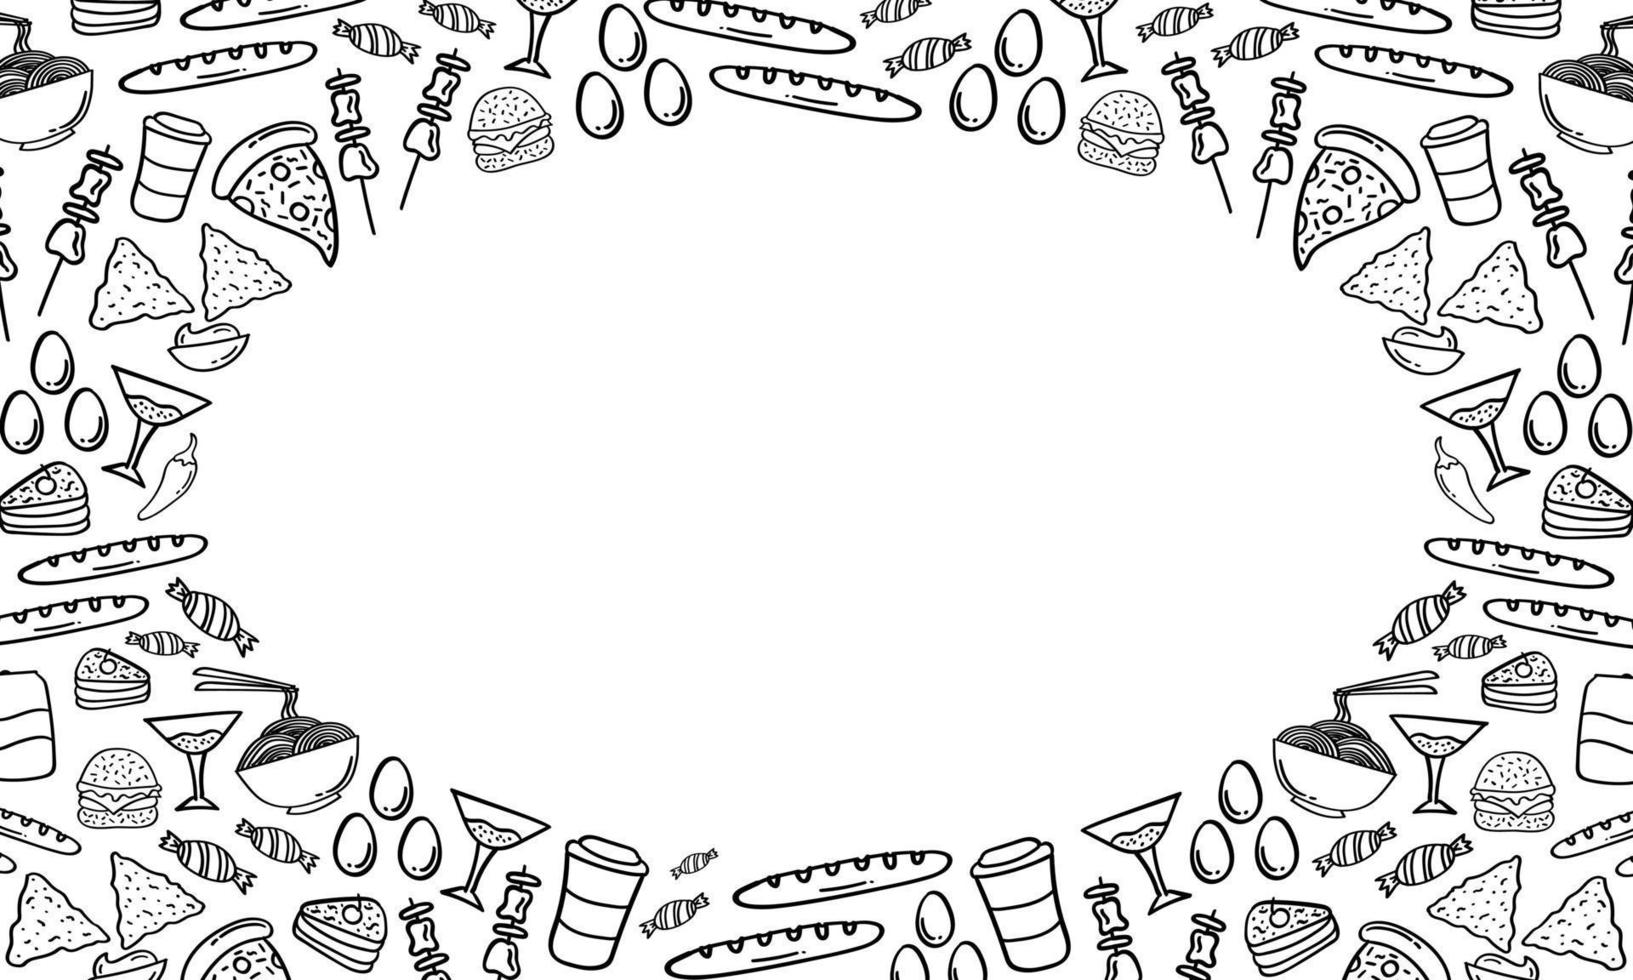 Frame of hand drawn food and beverage vector